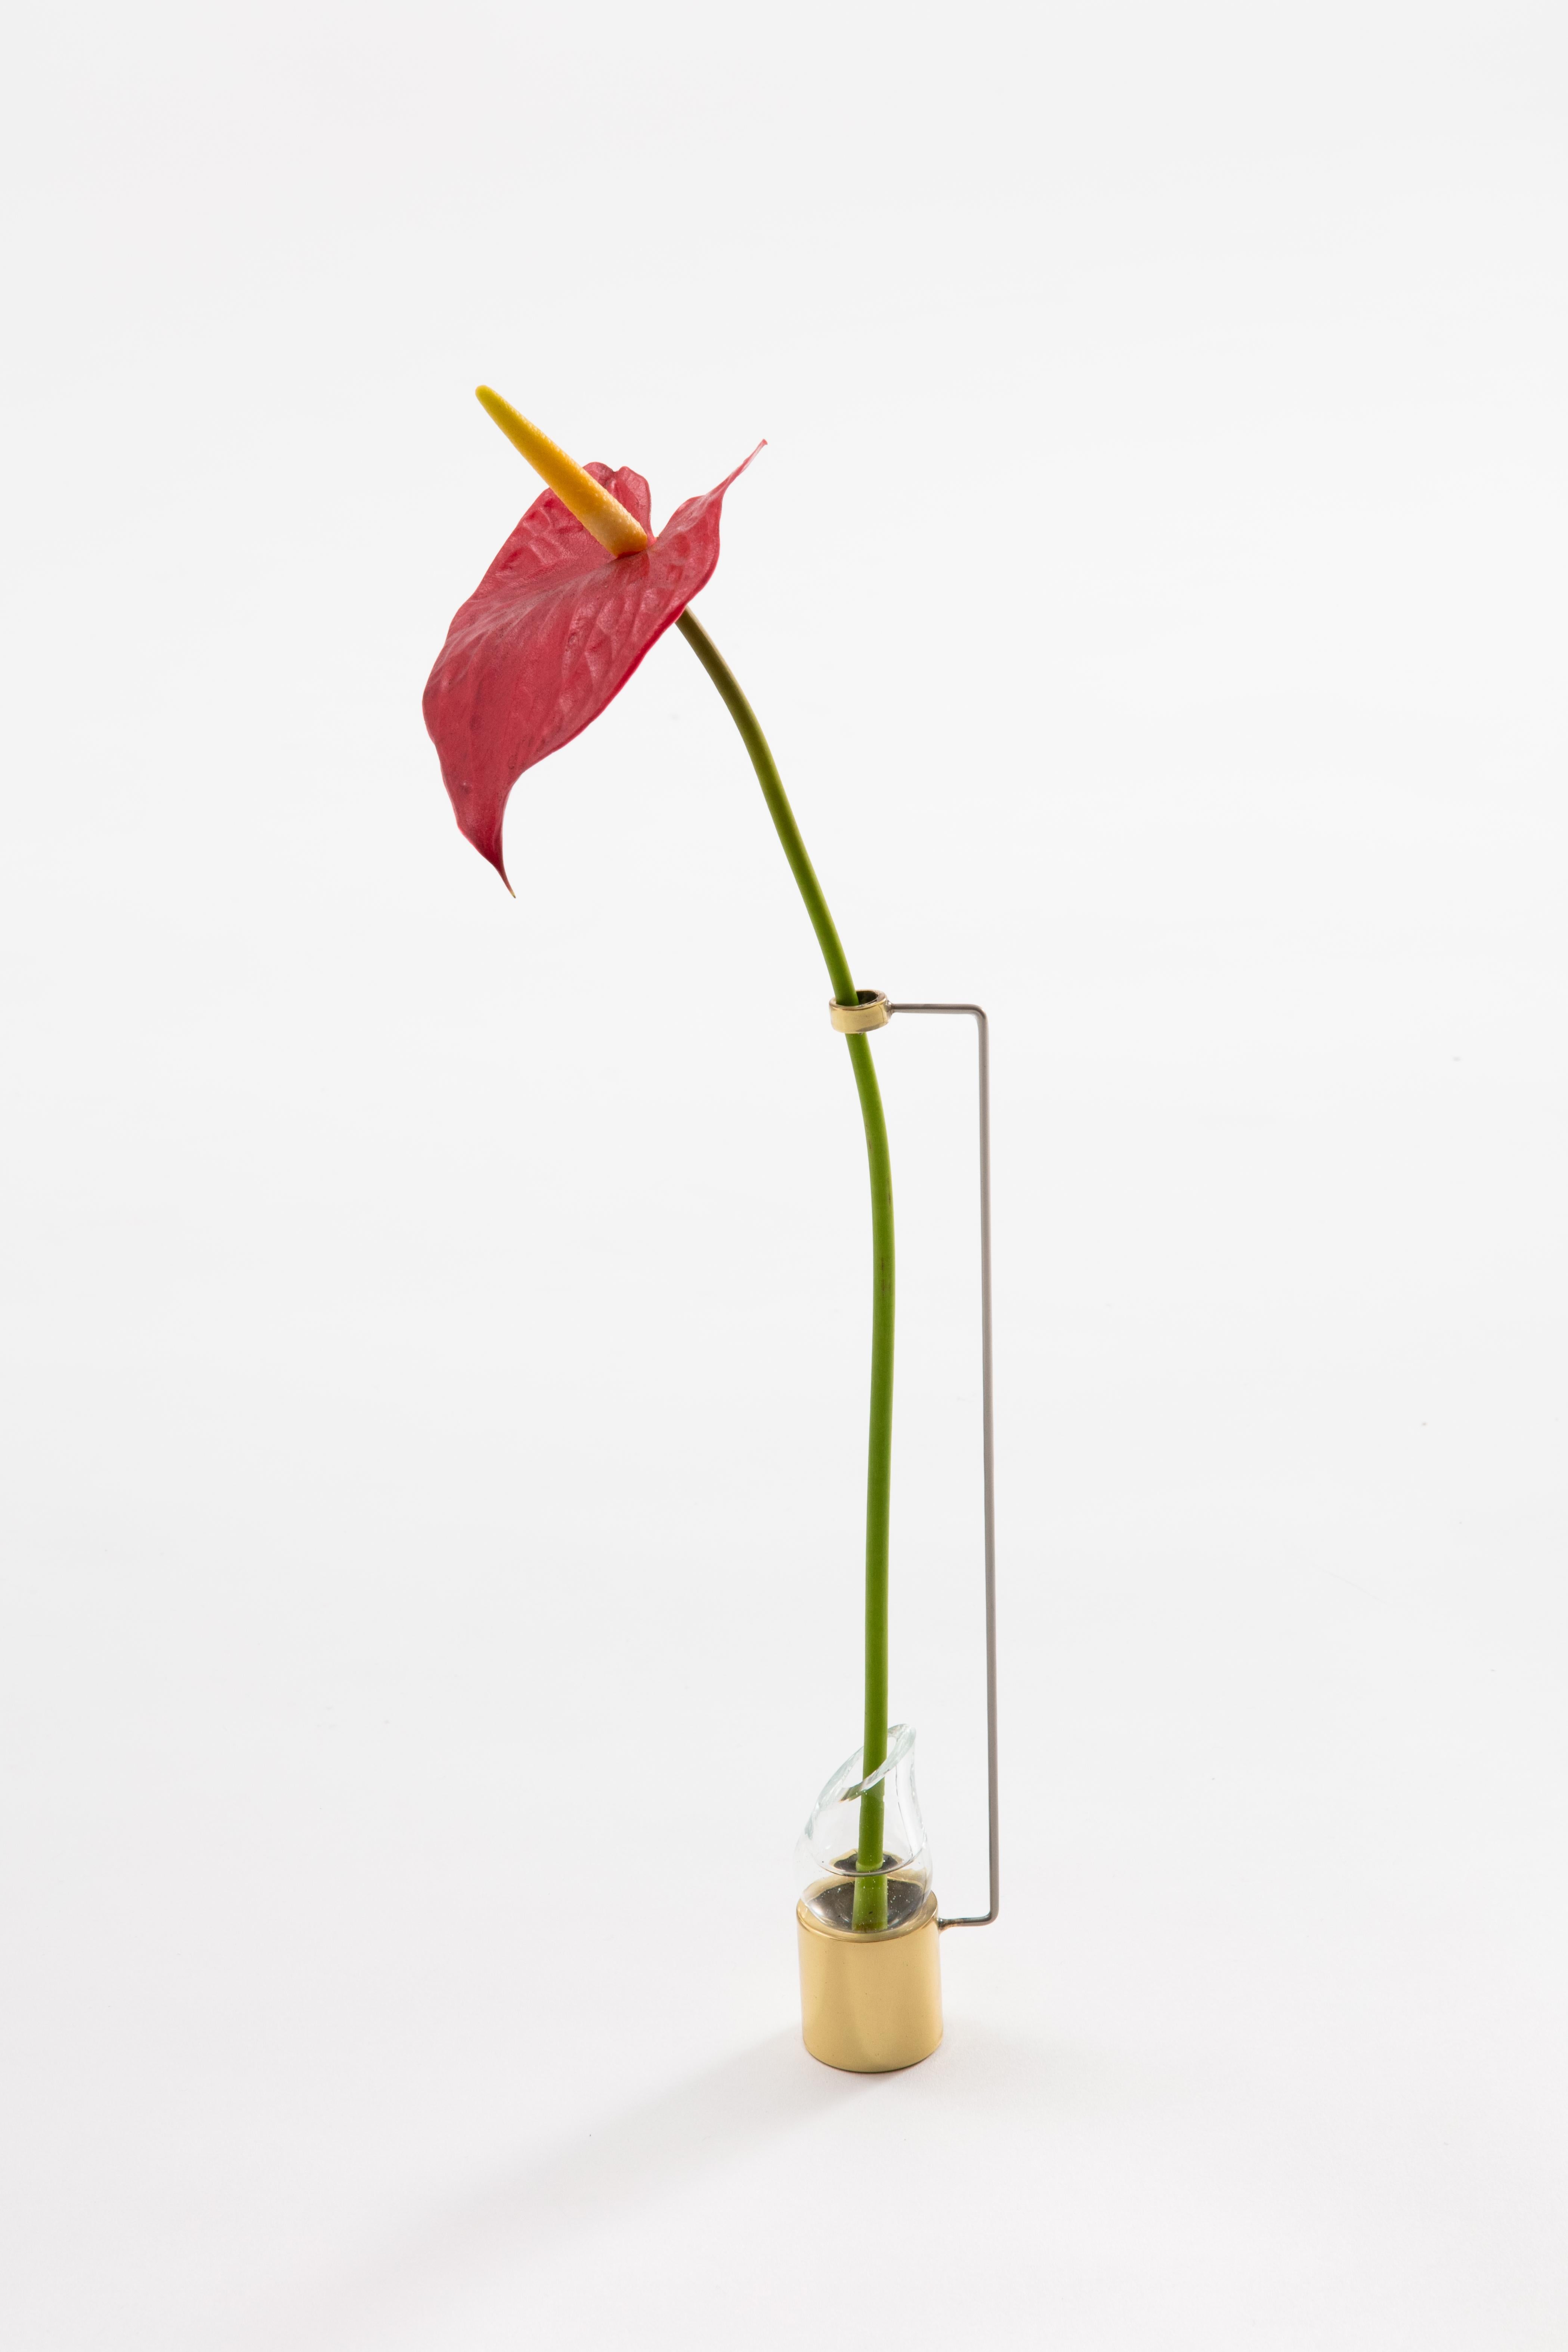 A set of 4 Piccolo vases:
Paulo Goldstein's Piccolo vase, Brazilian contemporary design is part of a series of vases that are inspired in the observation of the natural lines of the flowers and leaves held in them, where the lines of the vases were